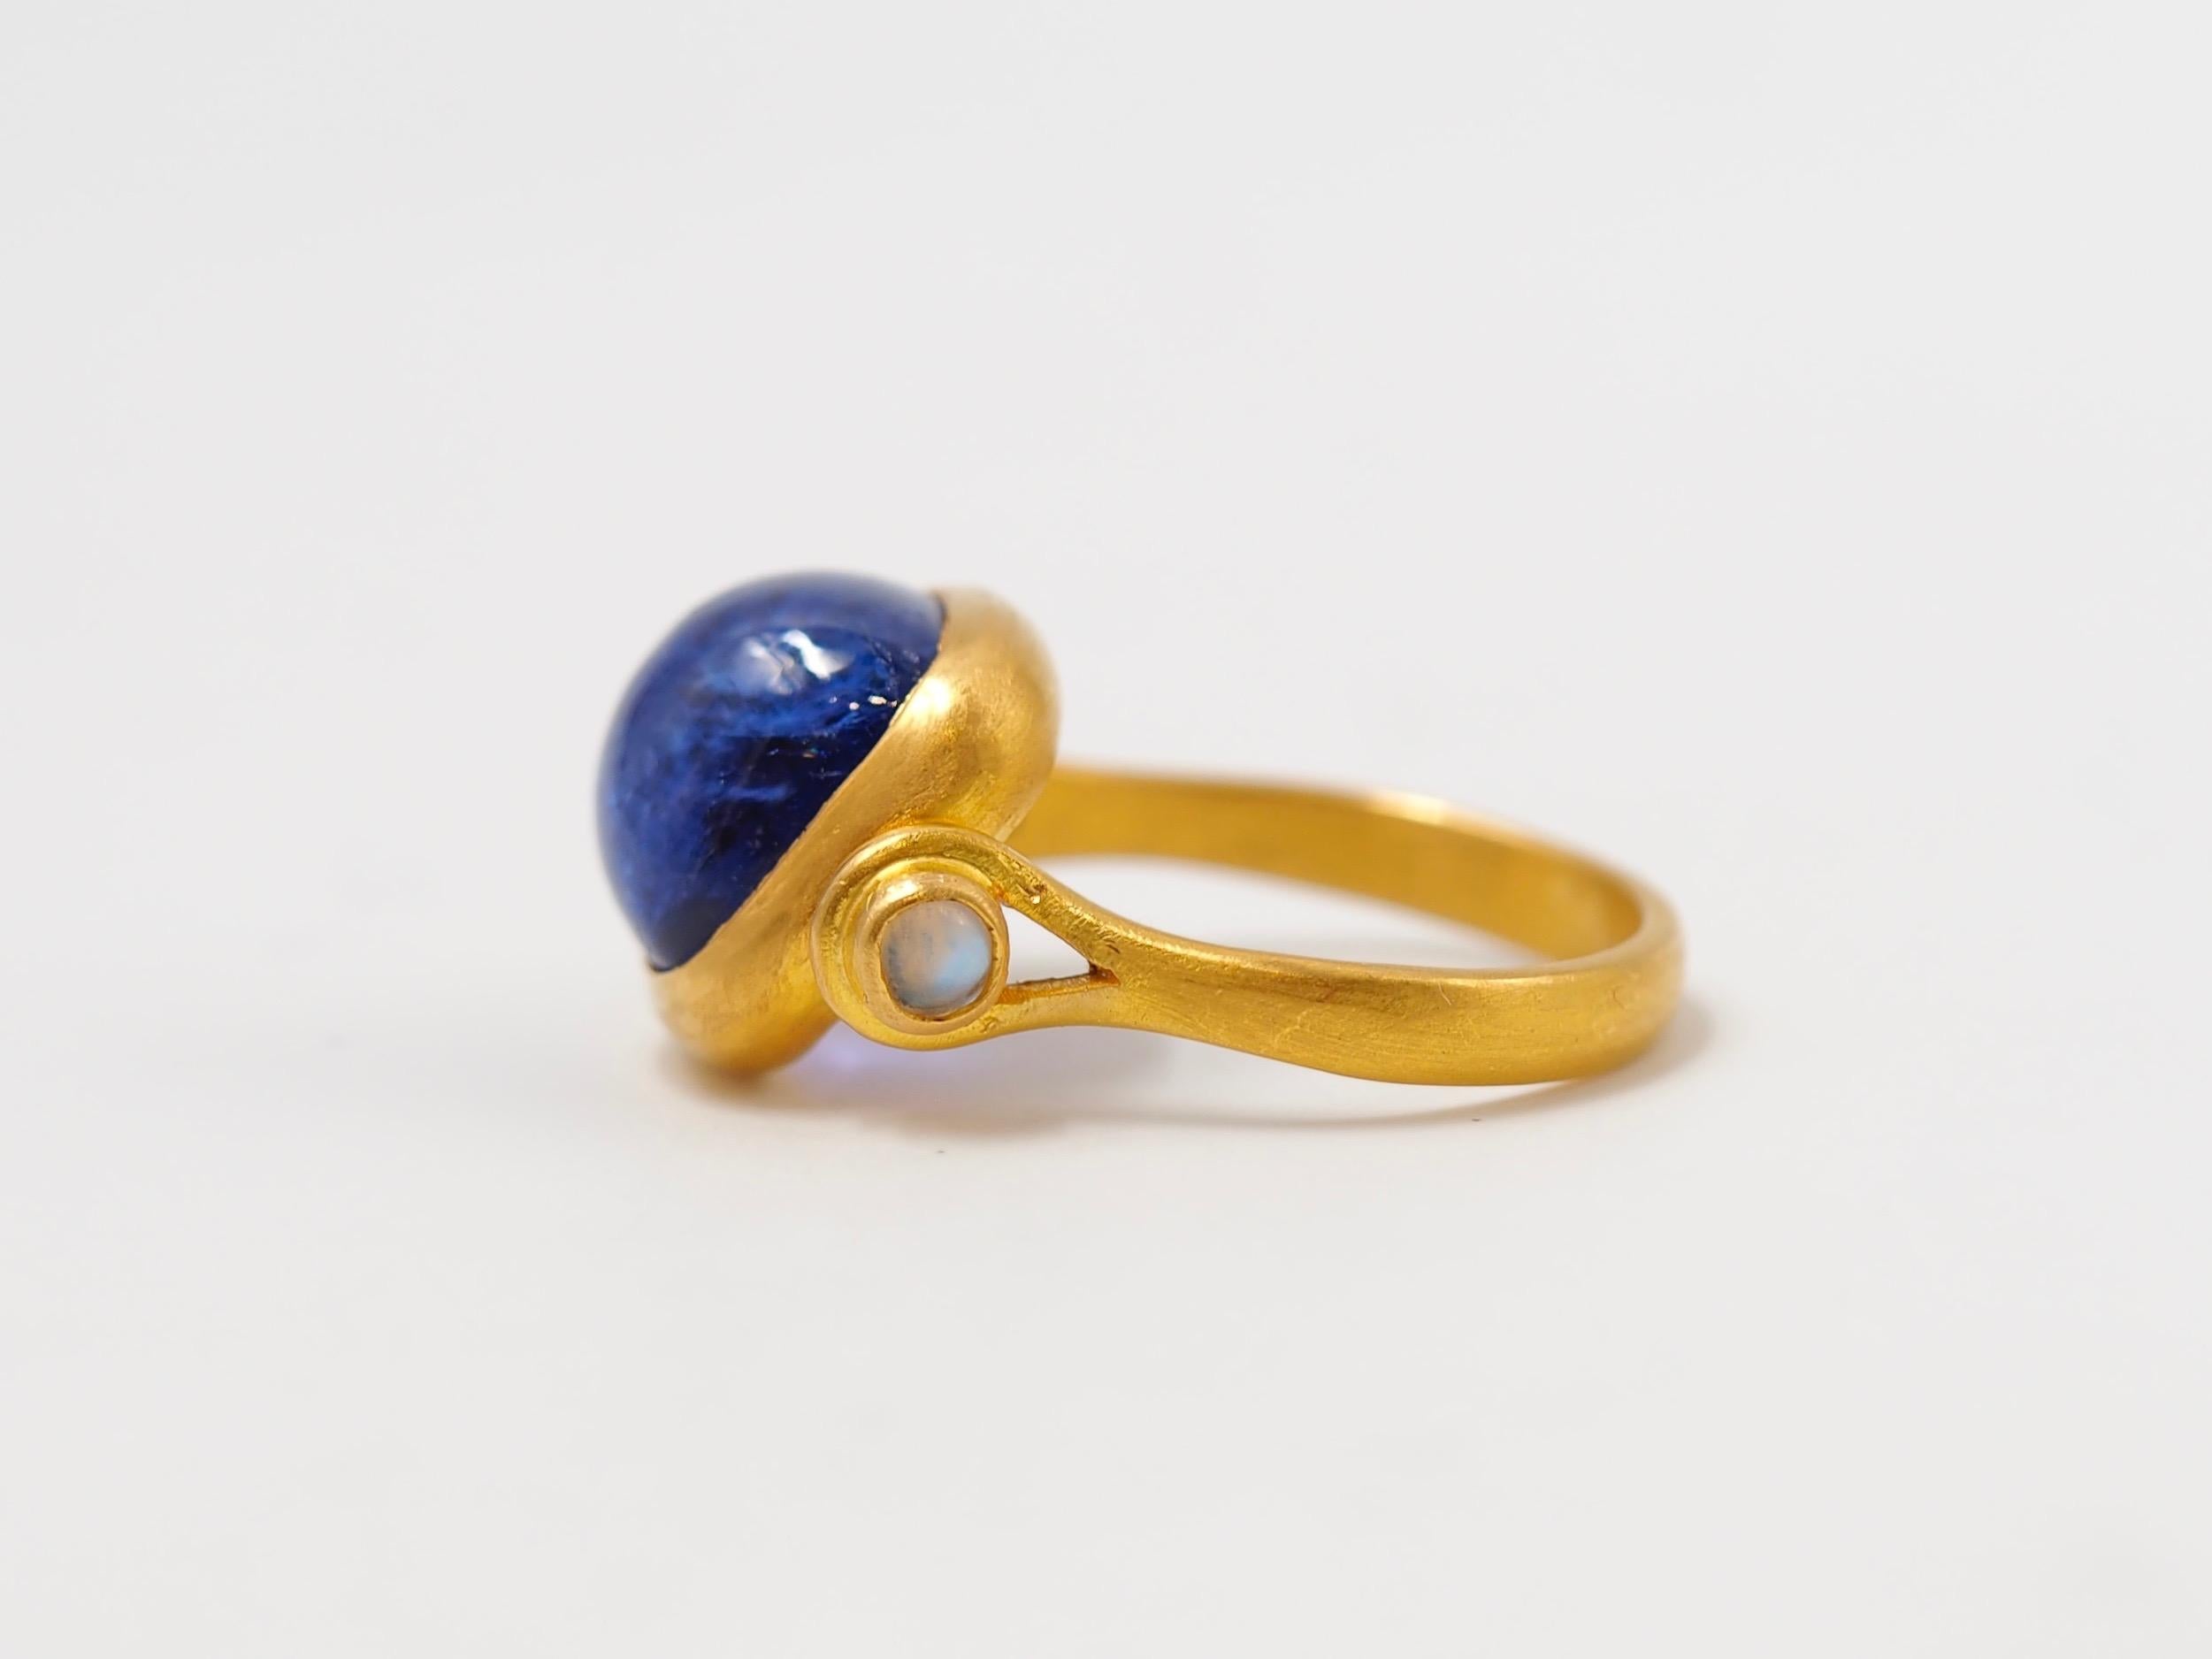 This antique style ring by Scrives is set with a purplish blue tanzanite sugarloaf cabochon of 6.46 cts. and 2 cabochon moonstones of 0.17cts on the side.
The central stone and its setting are slightly turning/moving in order to give more comfort.